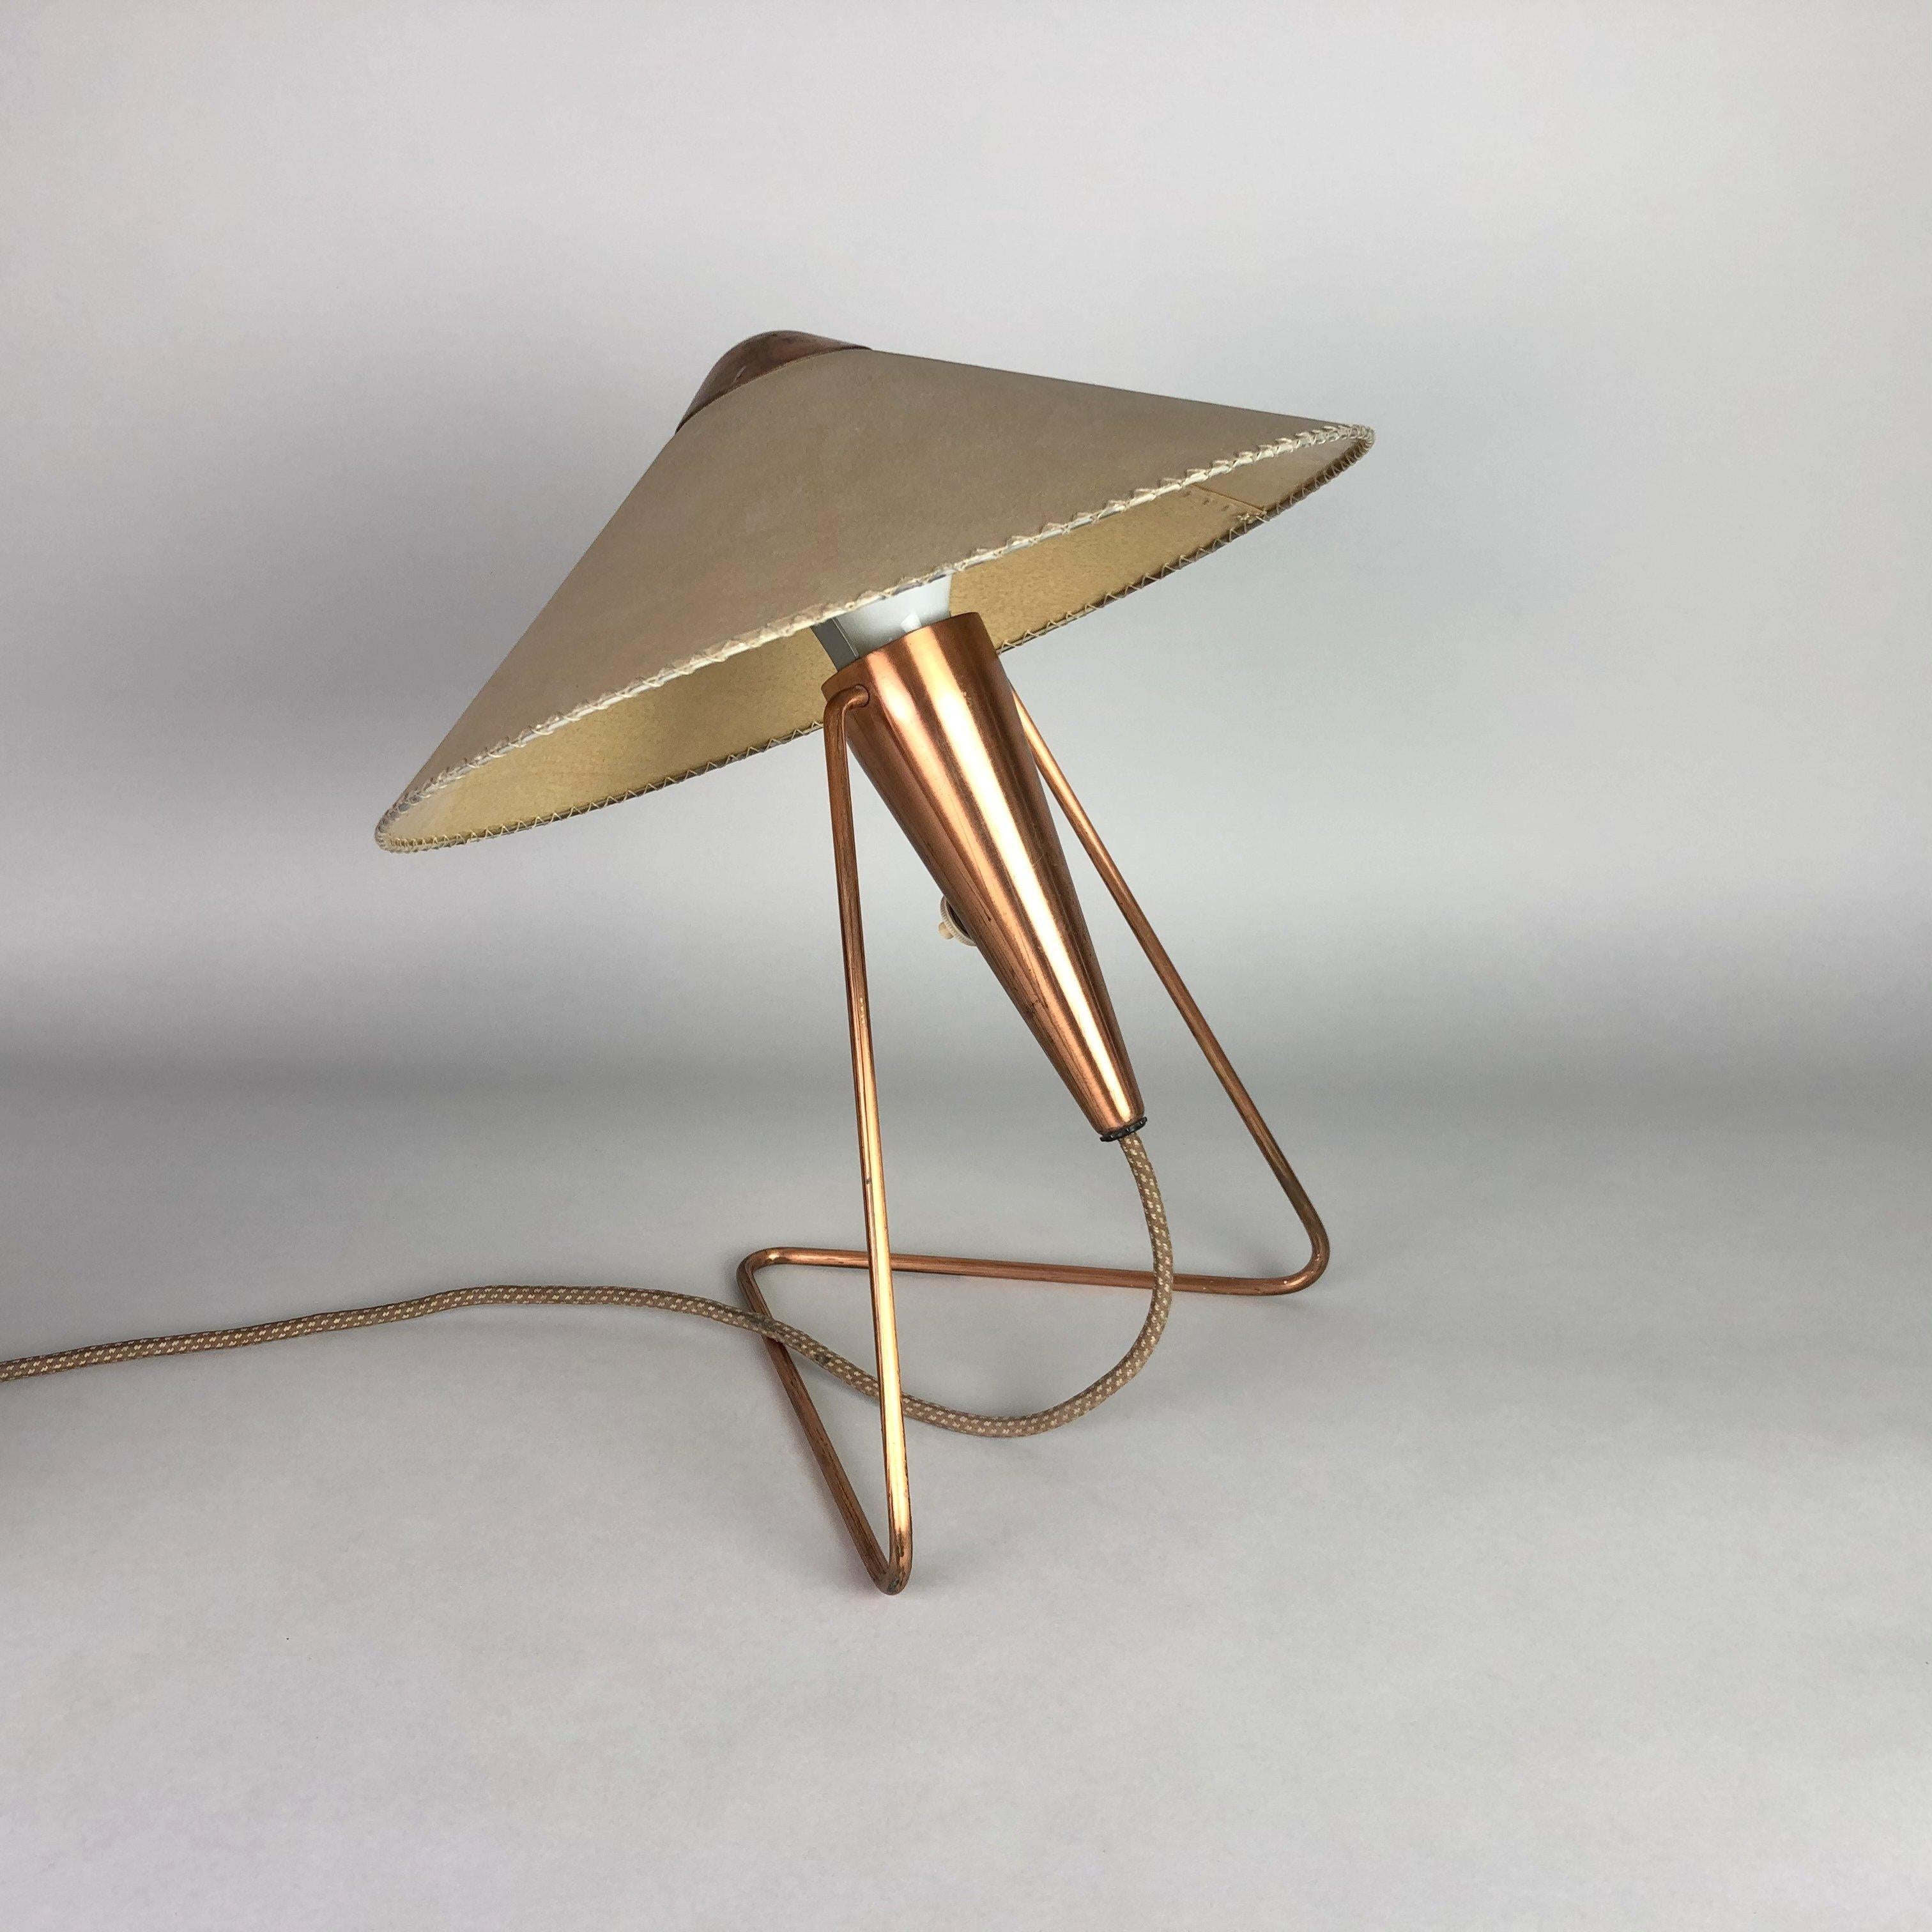 Gorgeous vintage lamp by designer Helena Frantova for OKOLO, Czechoslovakia. The lamp has it's original paper lamp shade and original, fully functional wiring. It is possible to hang it on the wall. Biggest version of the lamp.